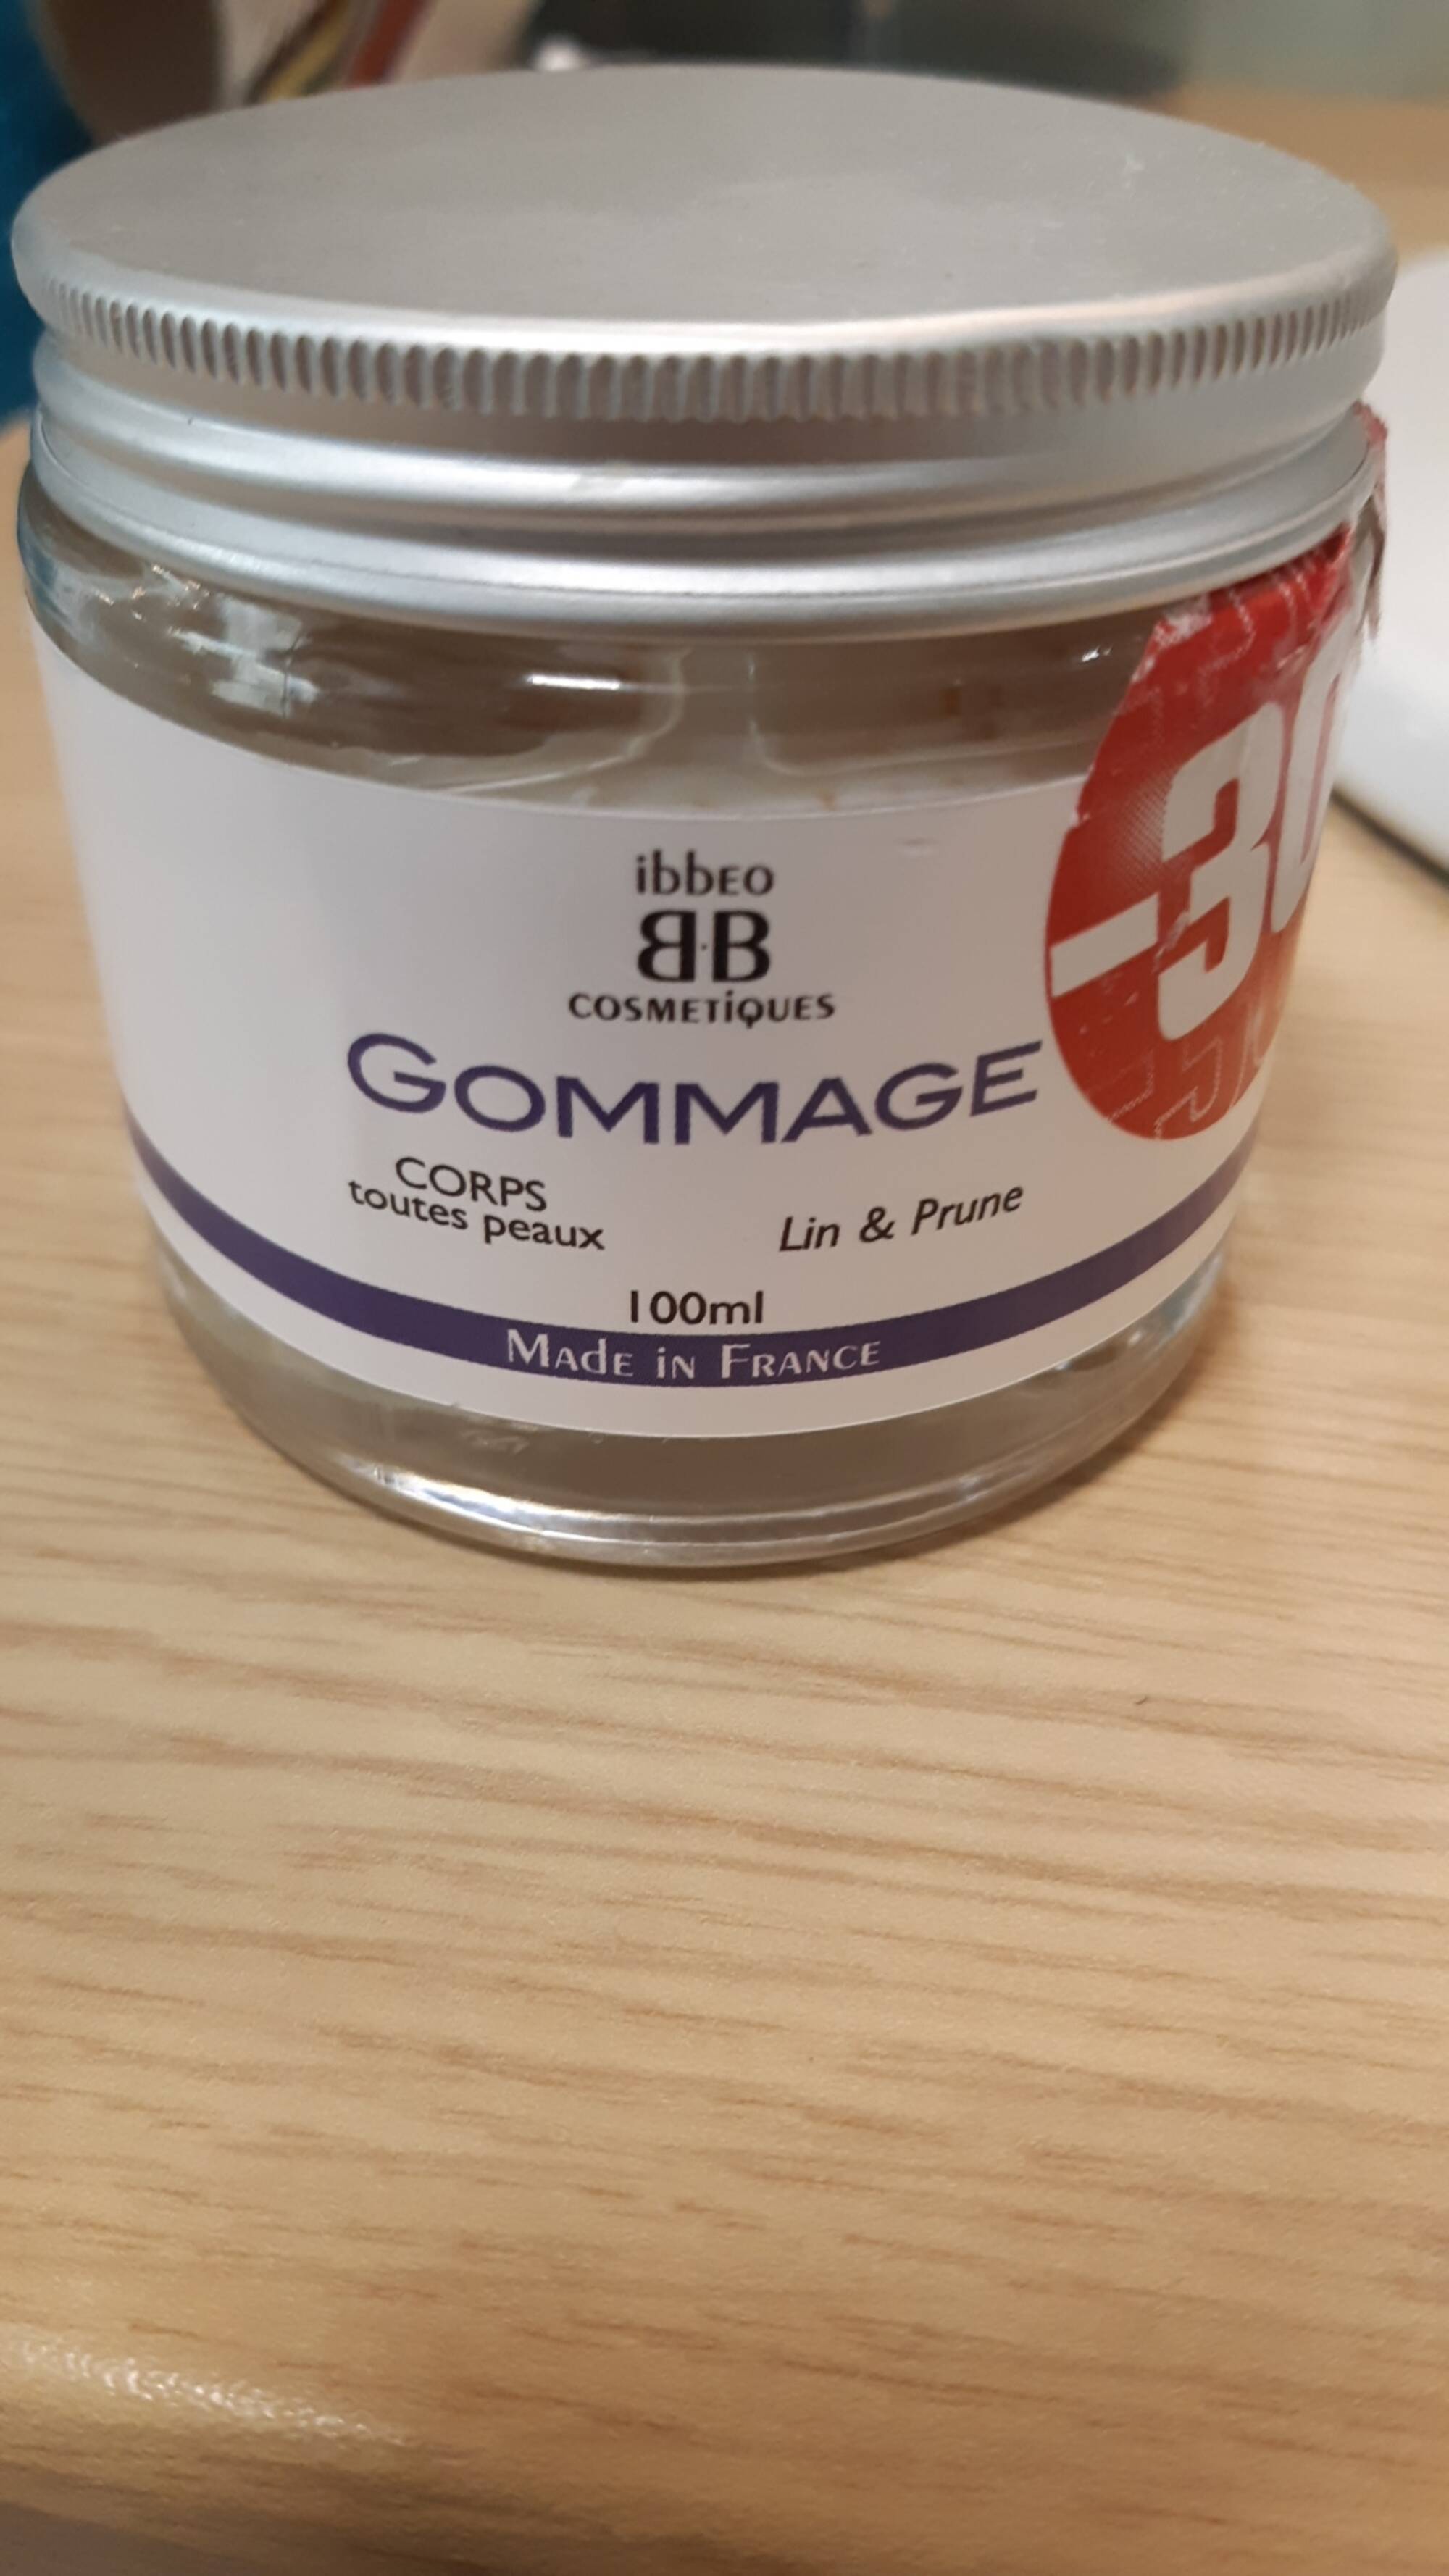 IBBEO COSMÉTIQUES - Gommage corps lin & prune